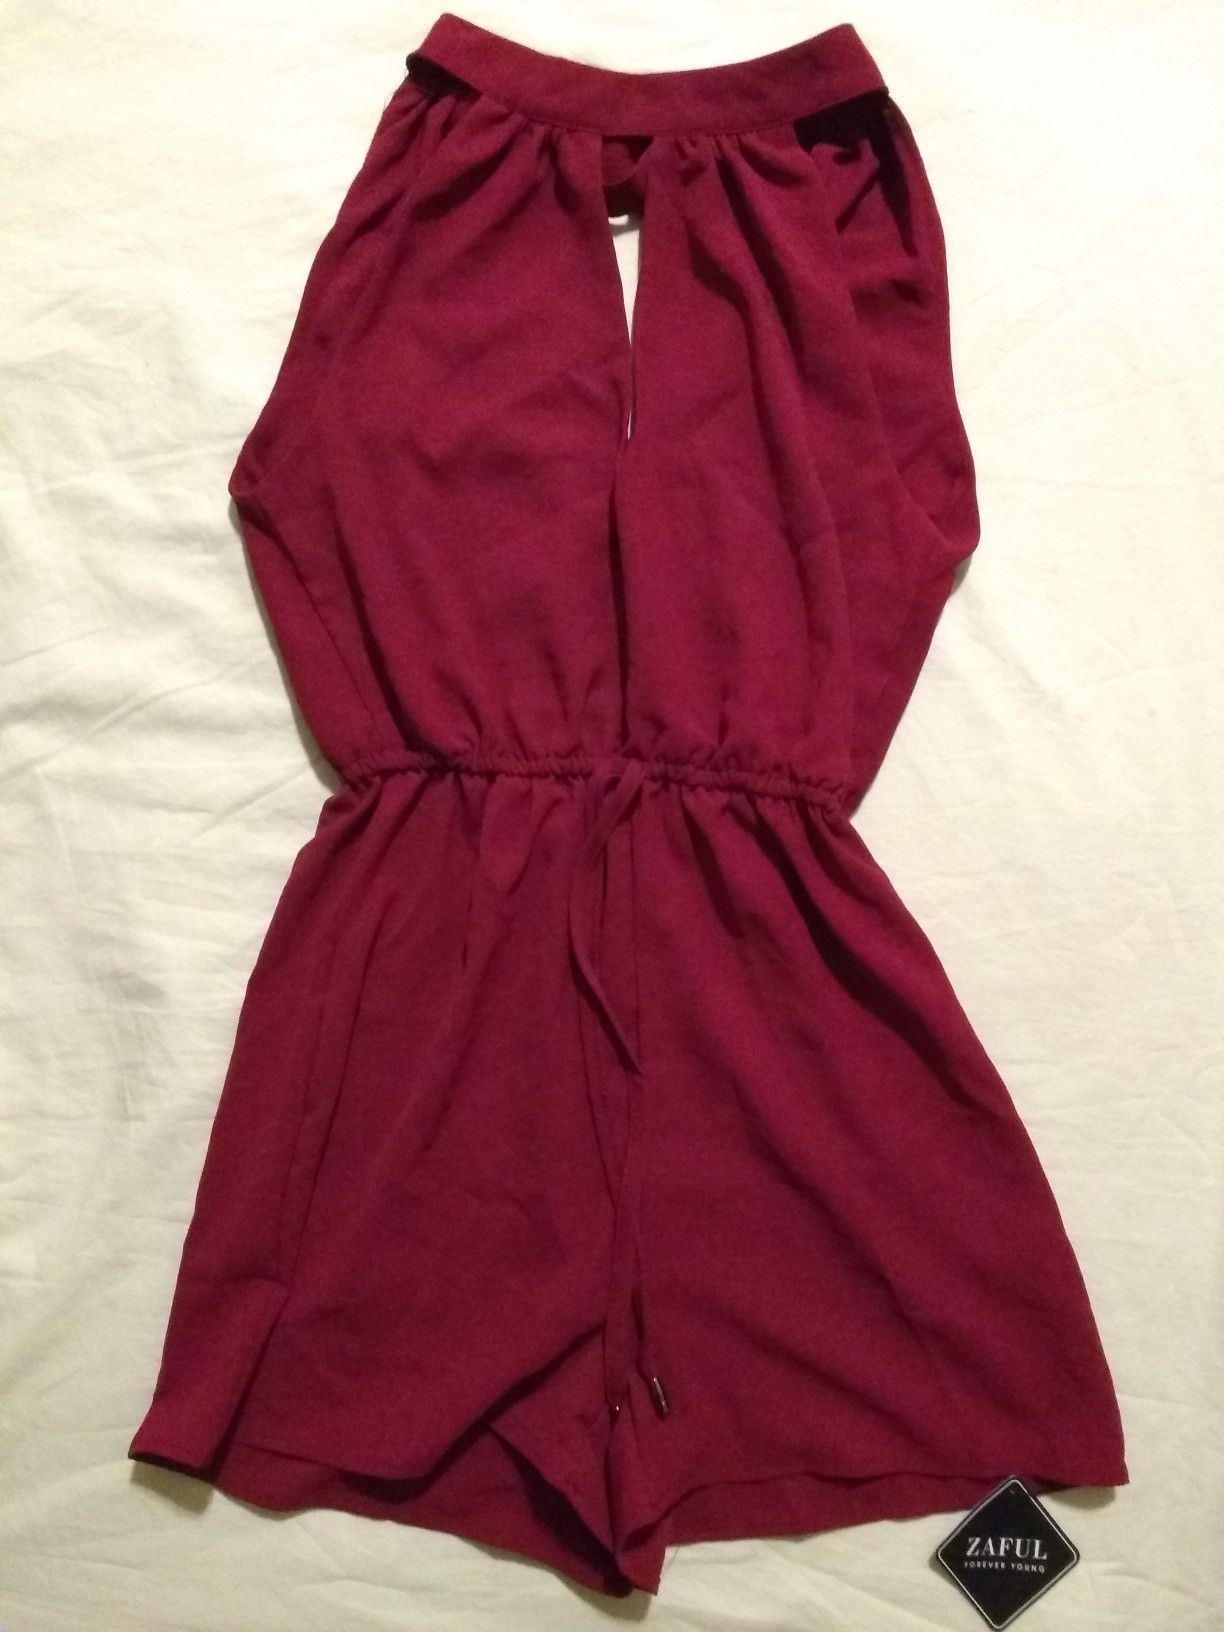 ZAFUL ROMPER SIZE SMALL. "PICK UP ONLY"